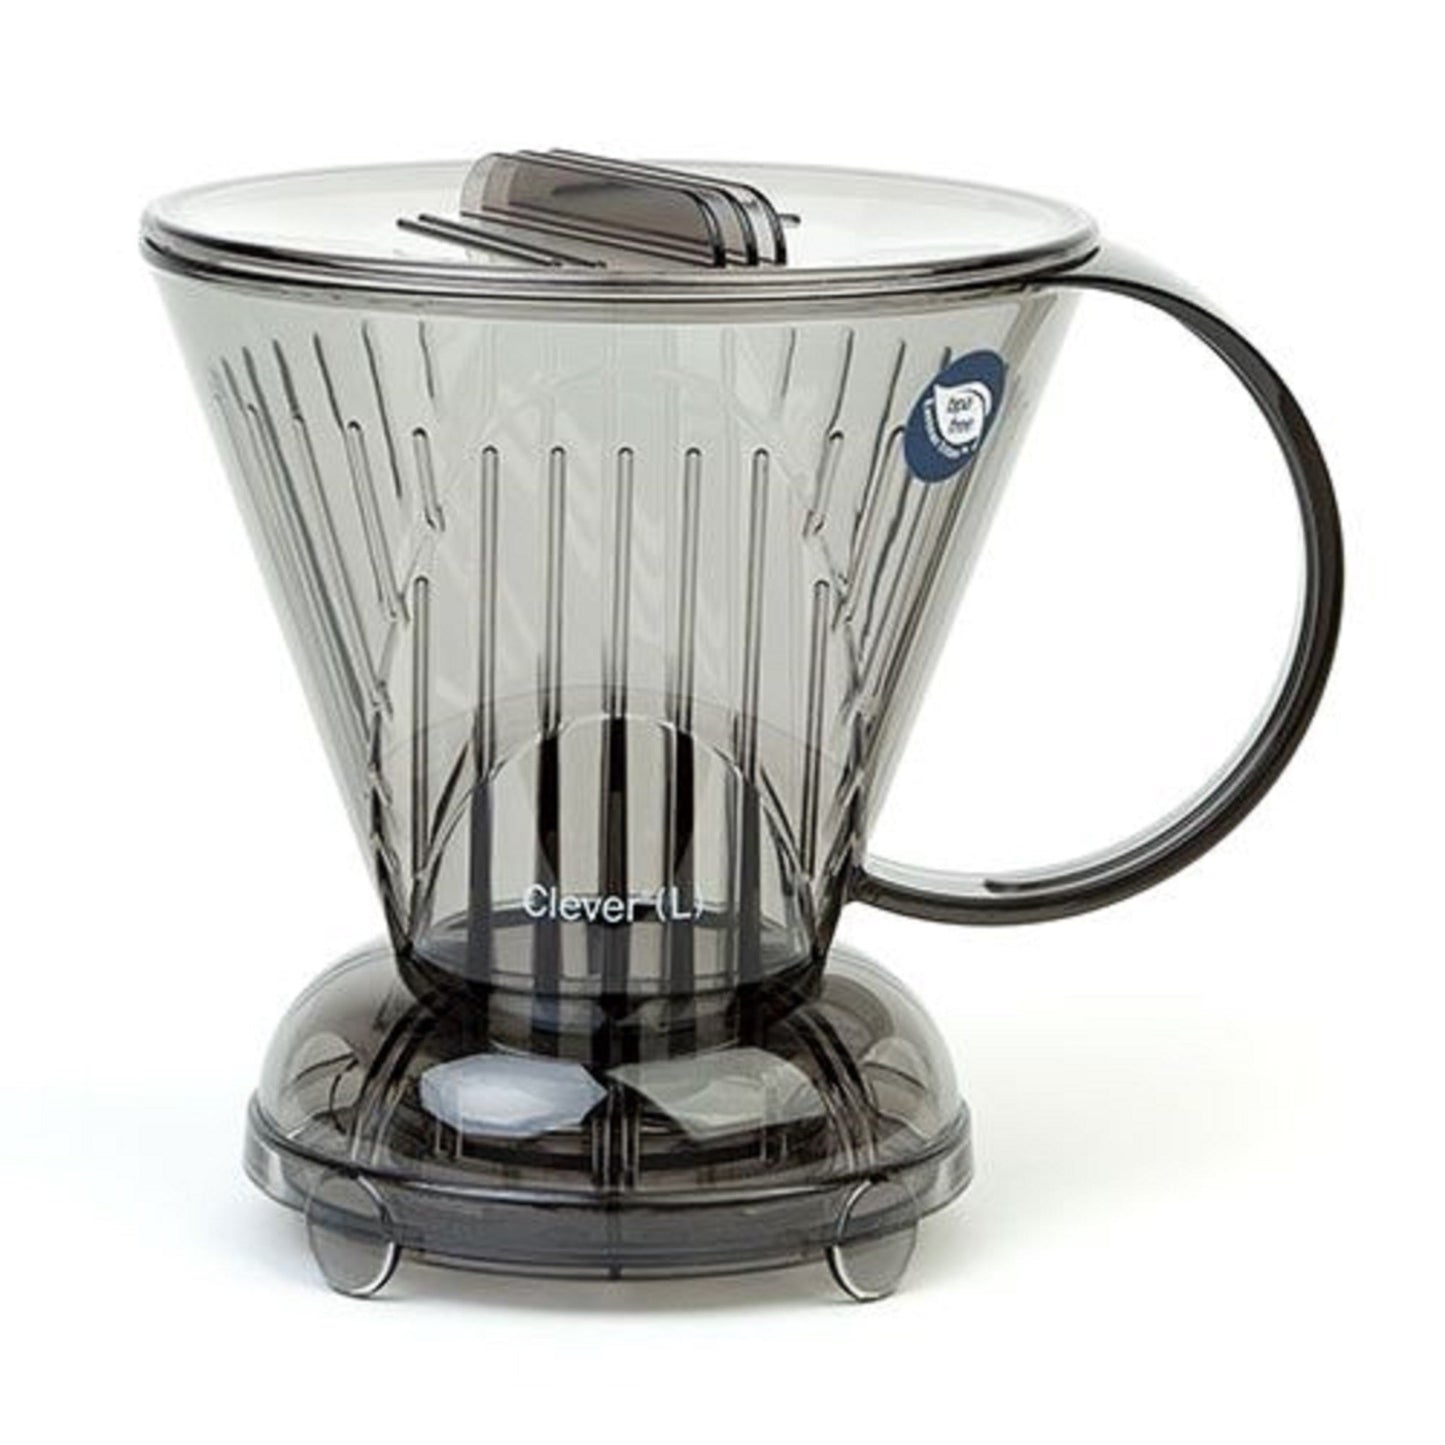 Load image into Gallery viewer, Clever Dripper - Coffee Dripper - Velo Coffee Roasters
